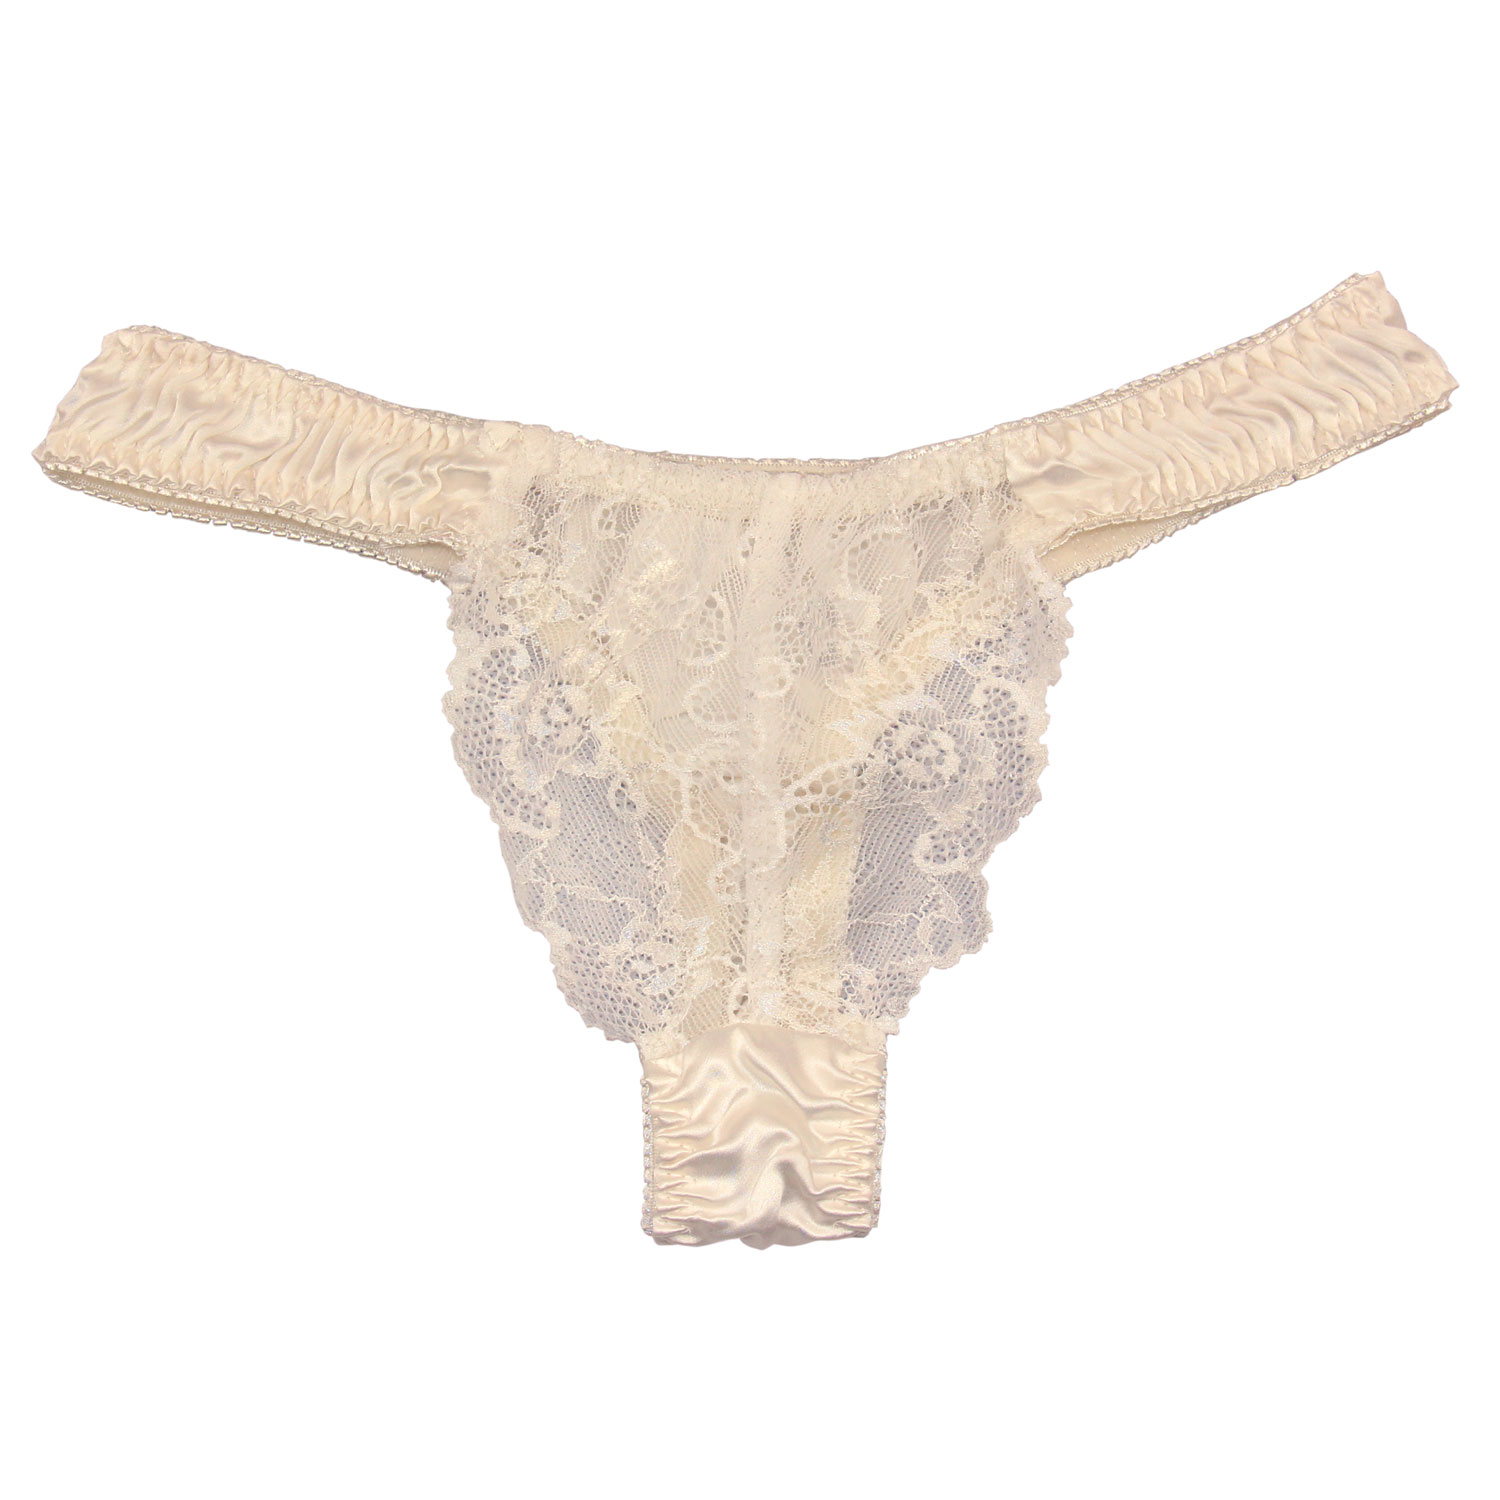 Women's Pure Silk Lace Thong 4 pairs in One Pack | eBay